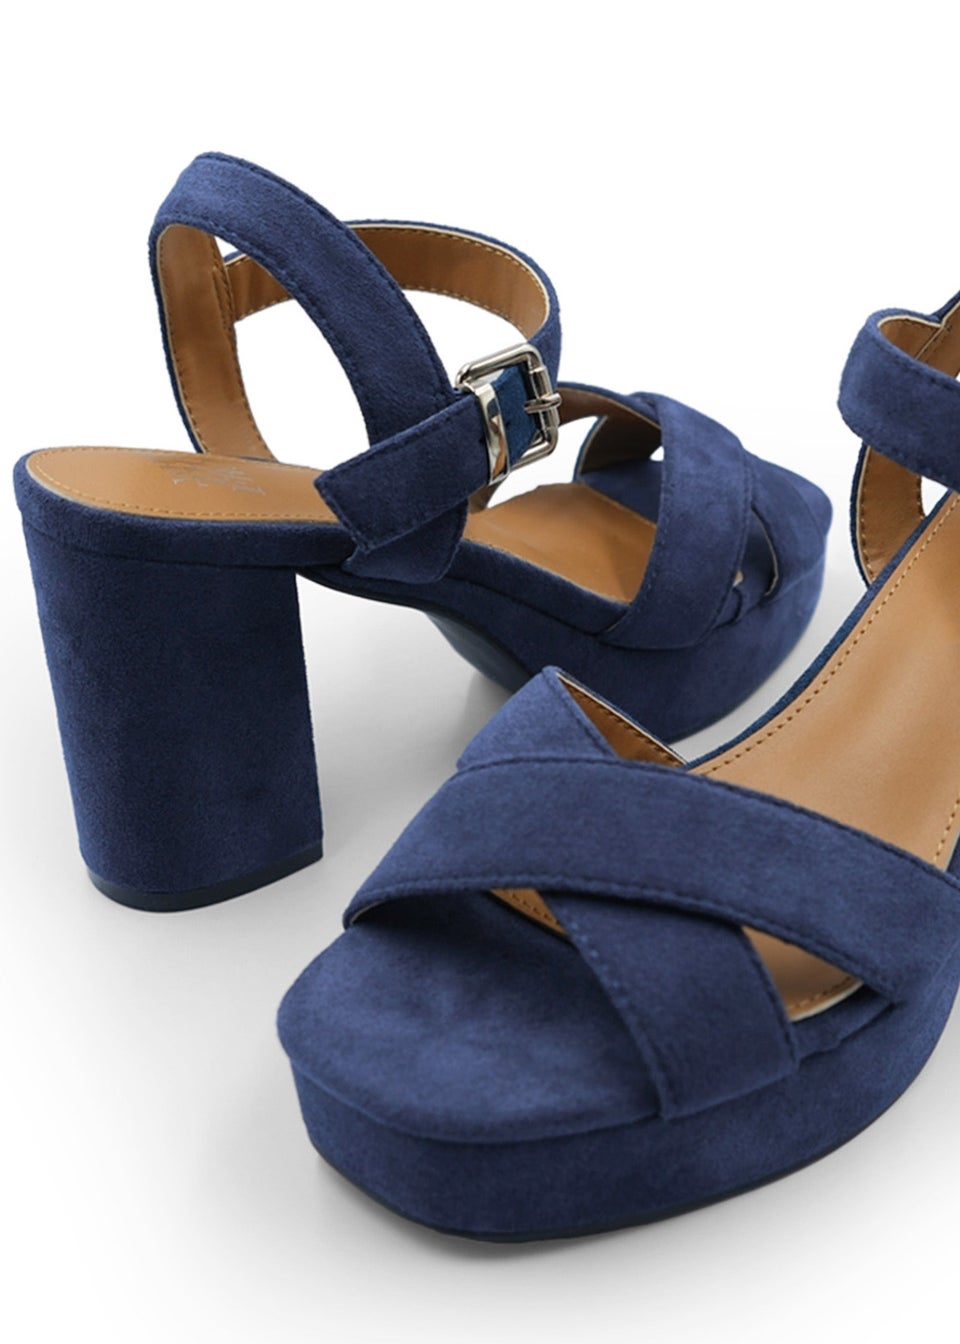 Where's That From Navy Marcia Wide Fit Suede Platform Heels